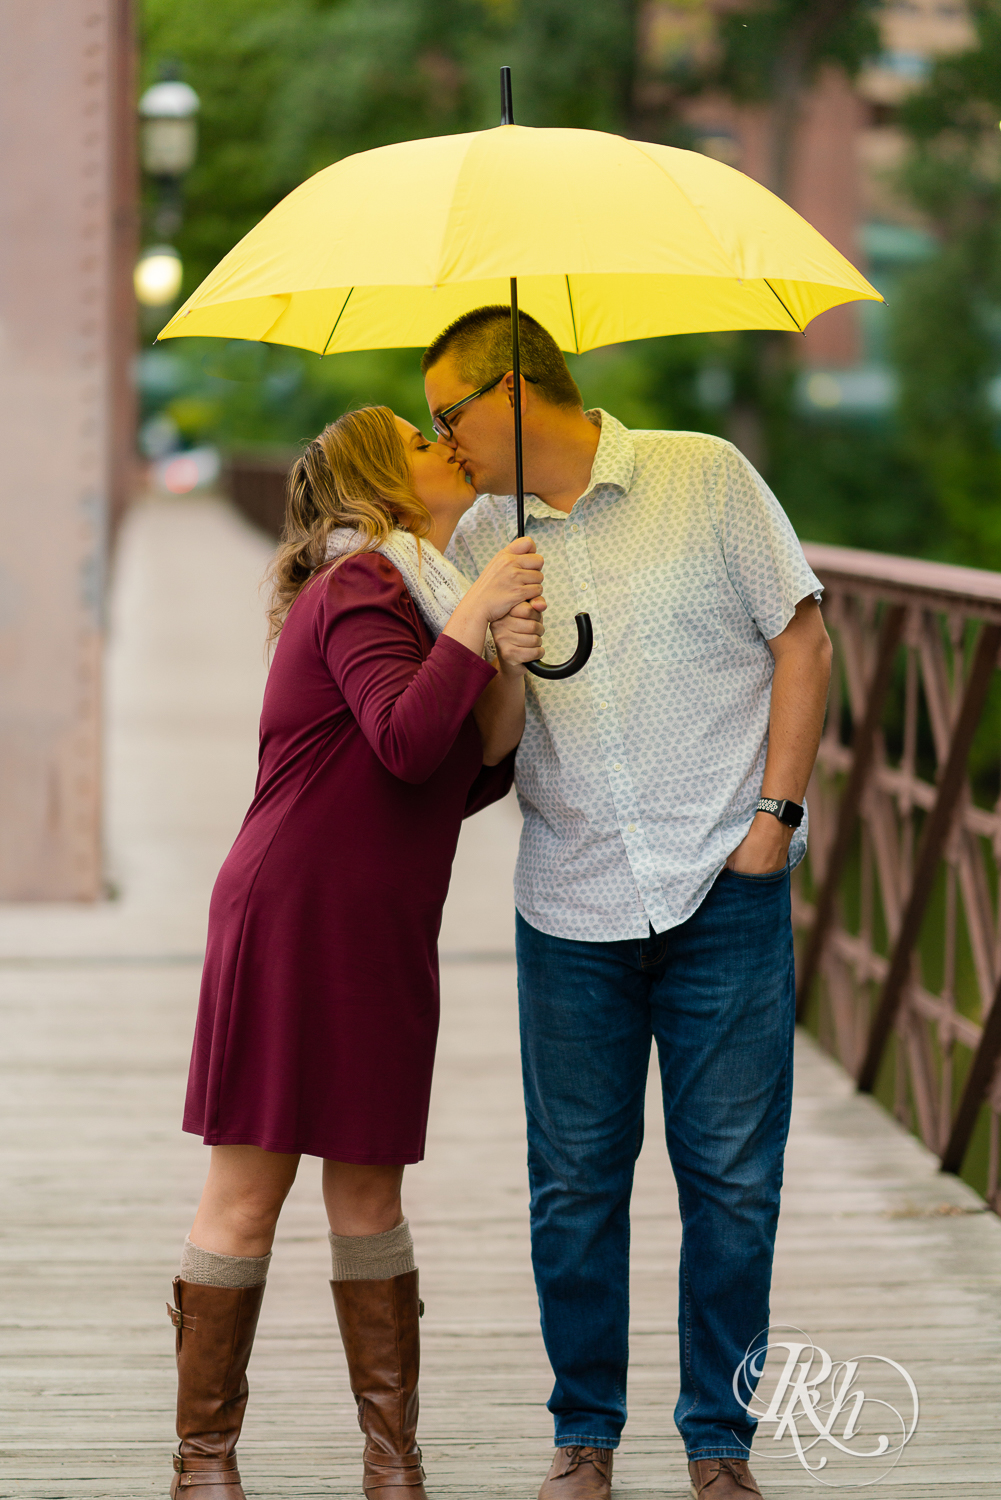 Man in glasses and woman is red dress and scarf kissing and holding umbrella on bridge in Minneapolis, Minnesota.